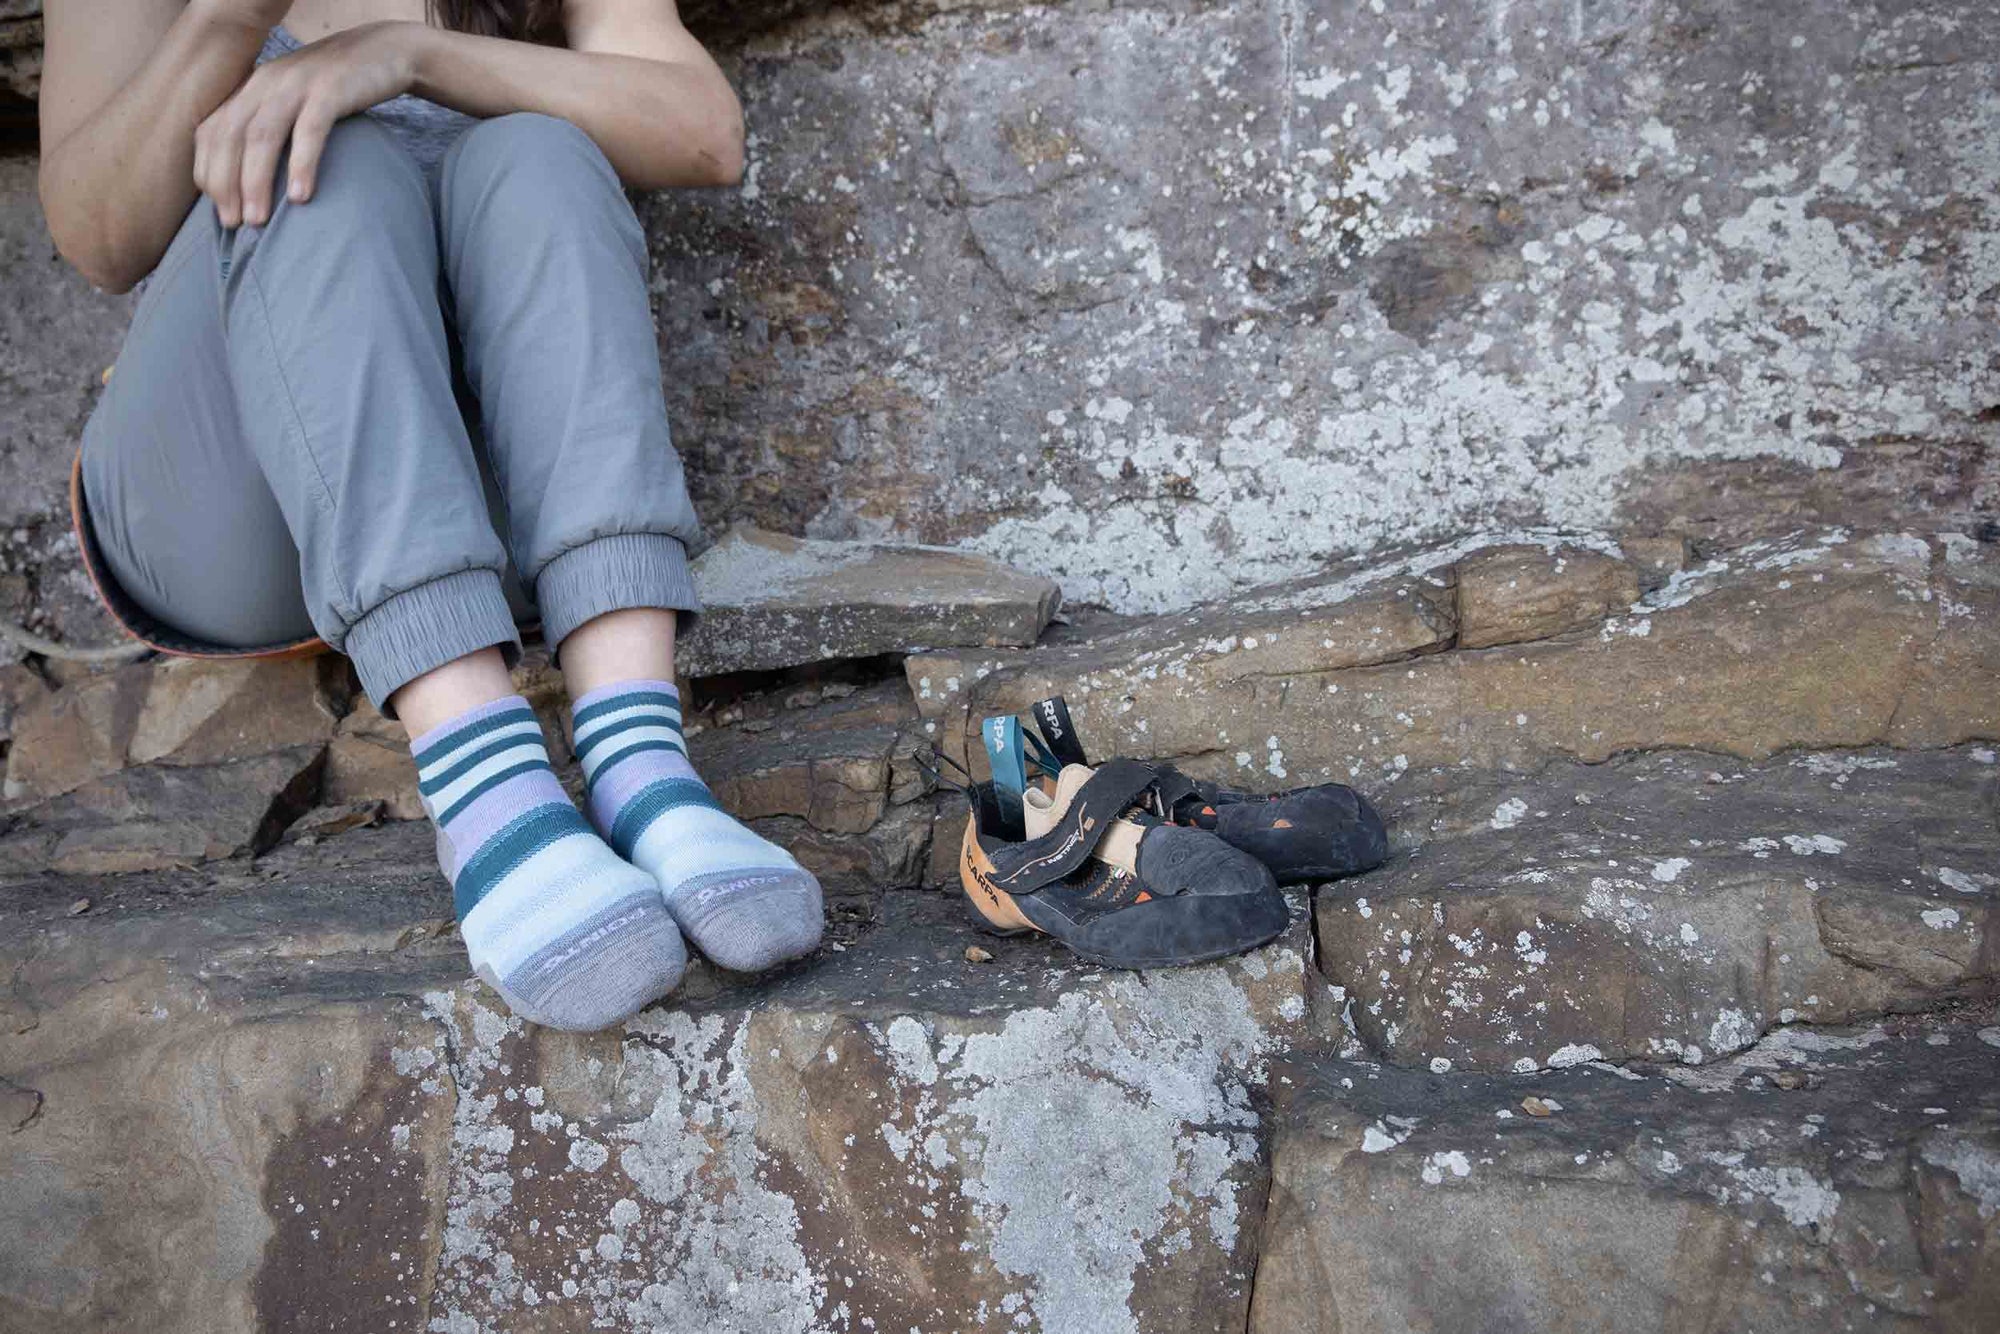 Climber sitting on ledge wearing colorful striped Point6 1/4 crew socks, with climbing shoes nearby.